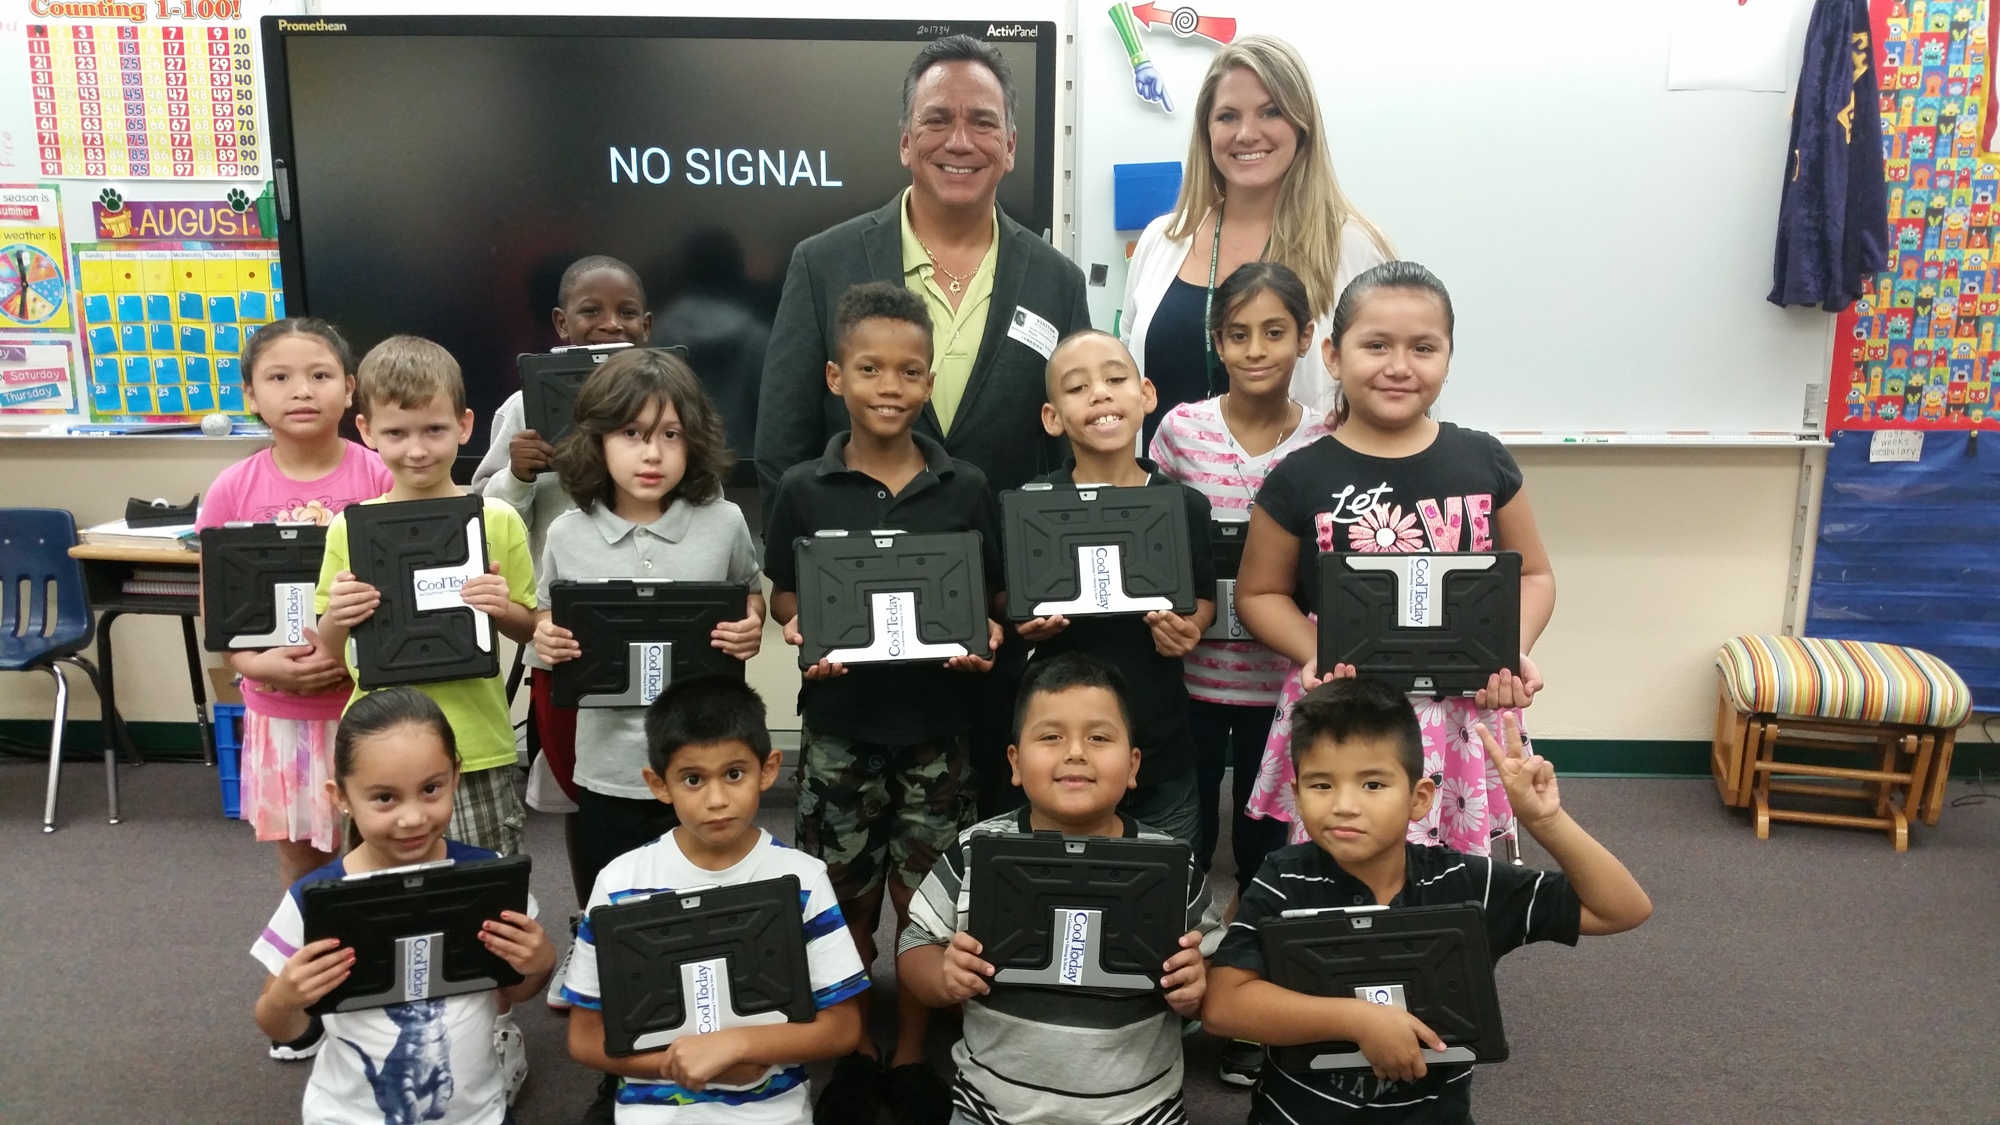 Courtesy photo. Jaime DiDomenico of Cool Today & Plumbing Today donates 18 tablet cases to Ashley Najjar's second grade class at Wilkinson Elementary School.